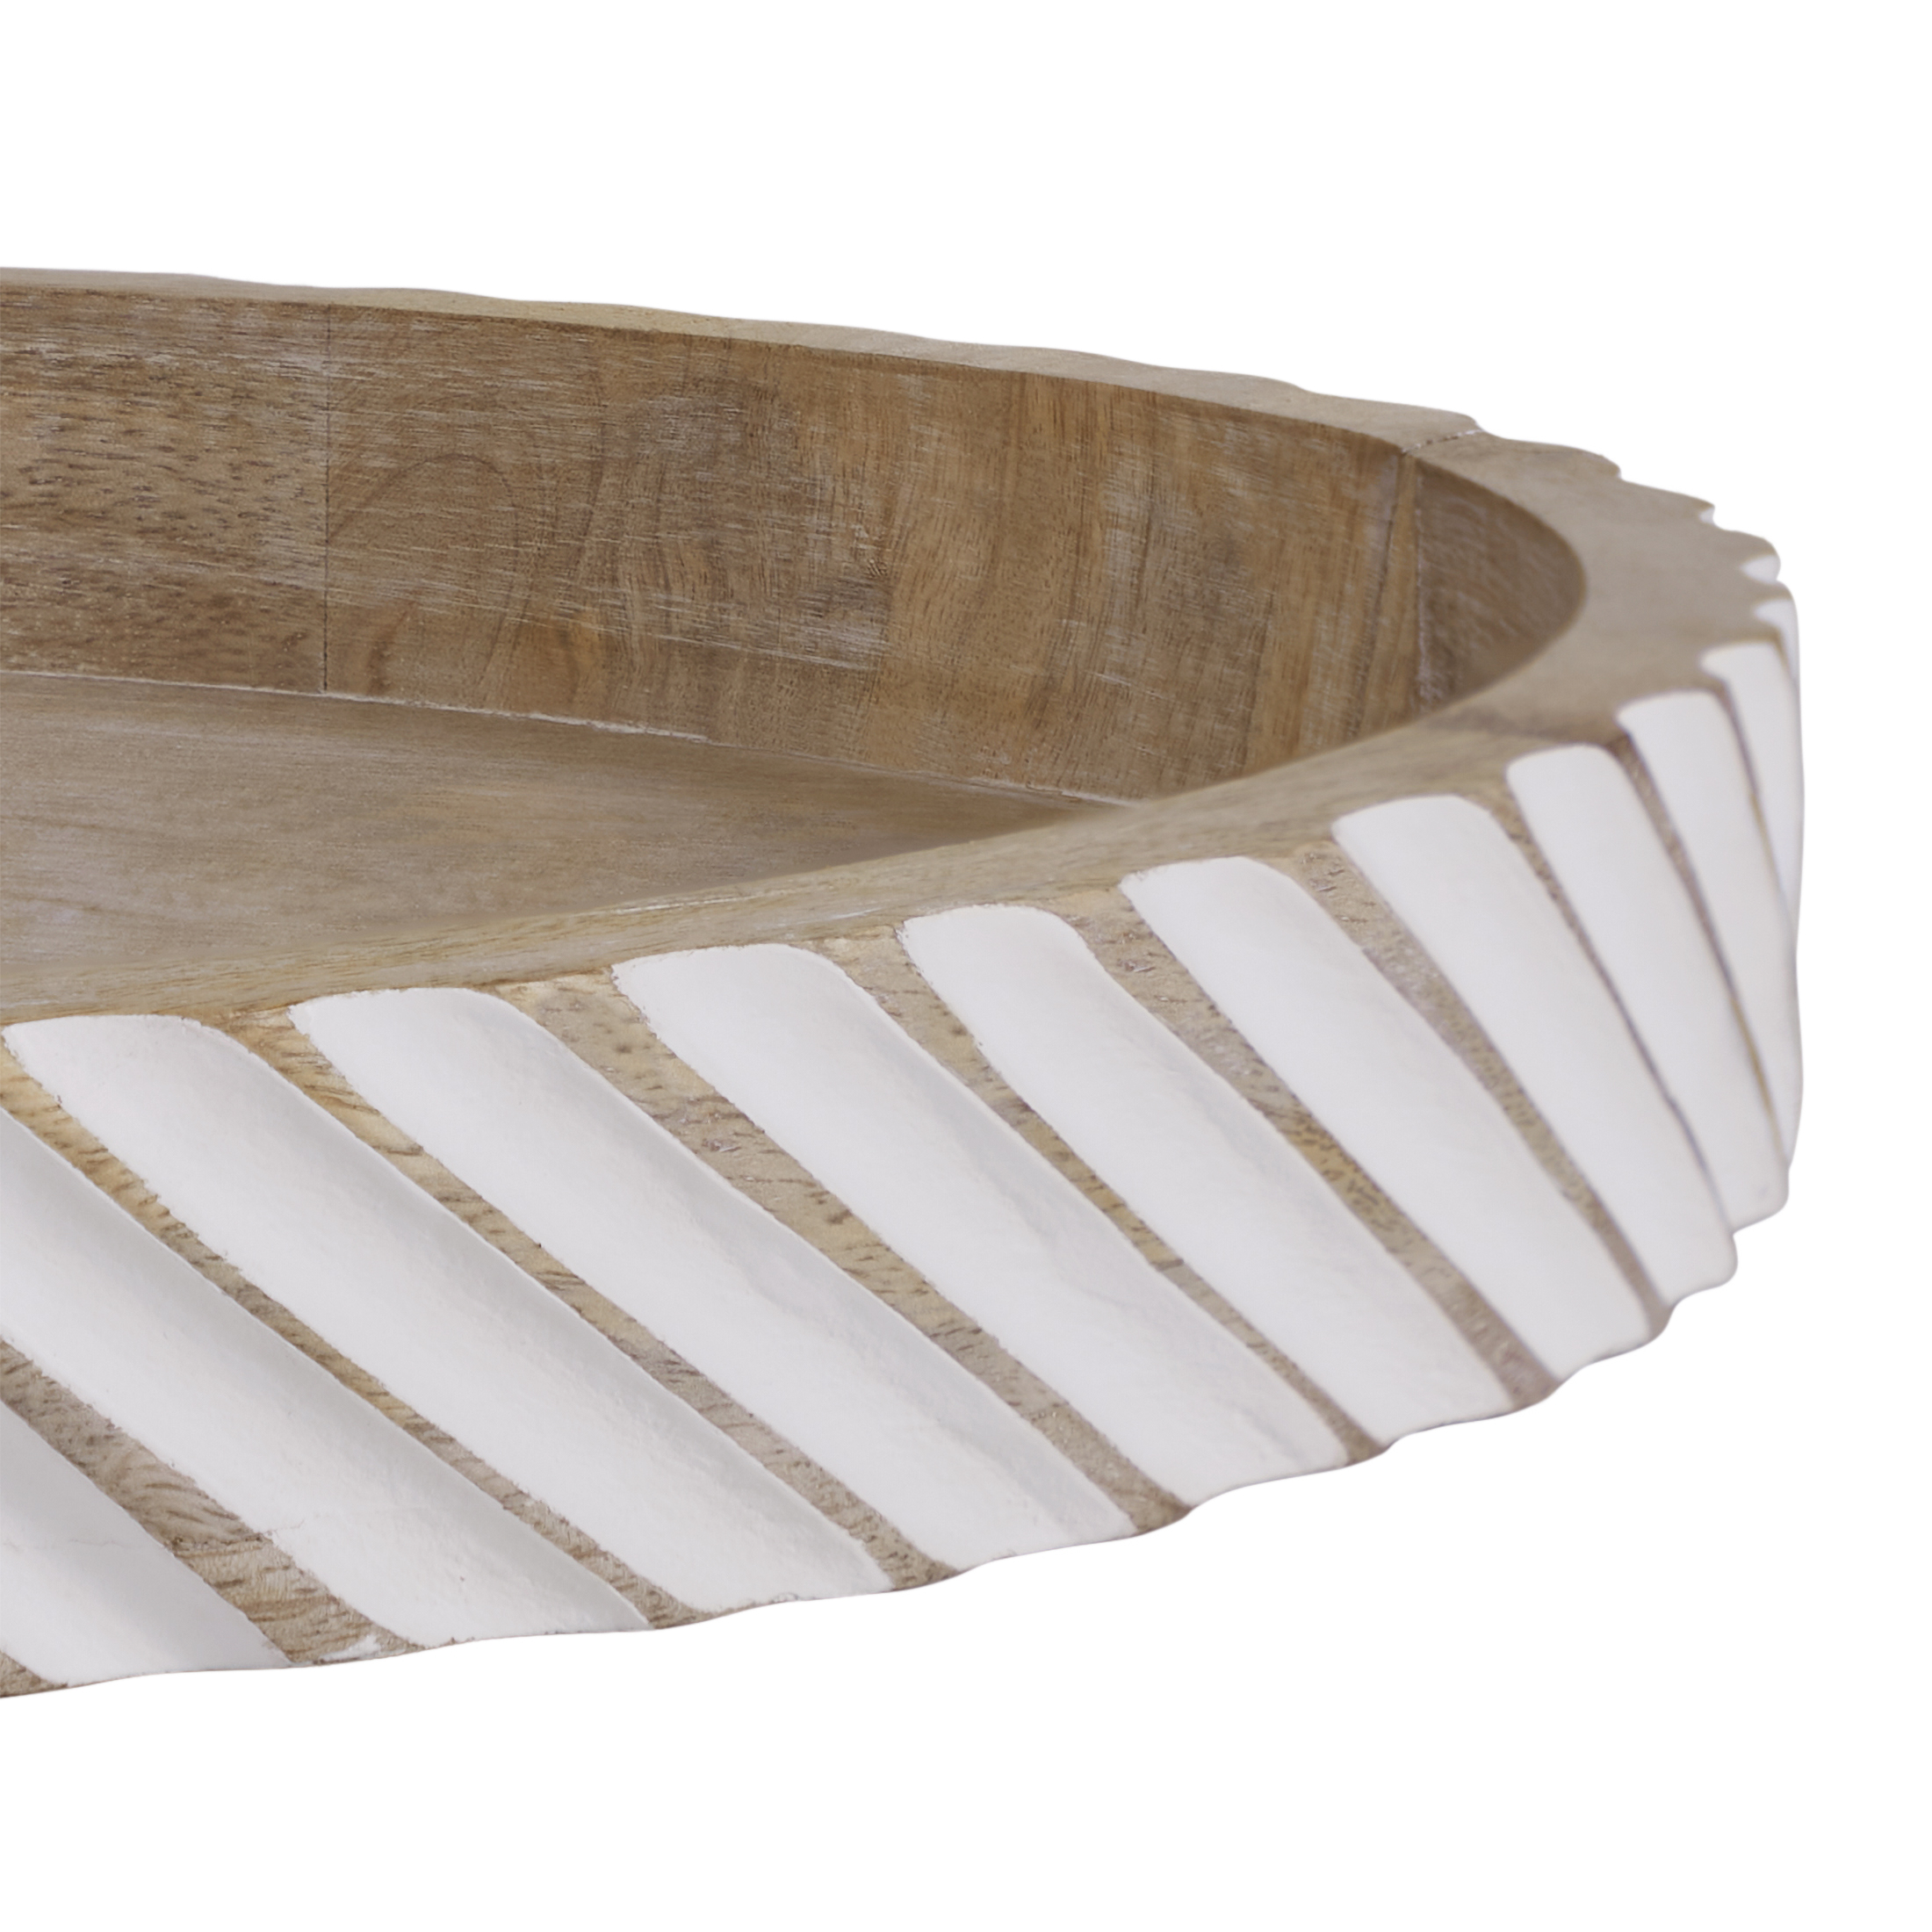 My Texas House 16" Natural White Diagonal Round Wood Decorative Tray - image 5 of 5